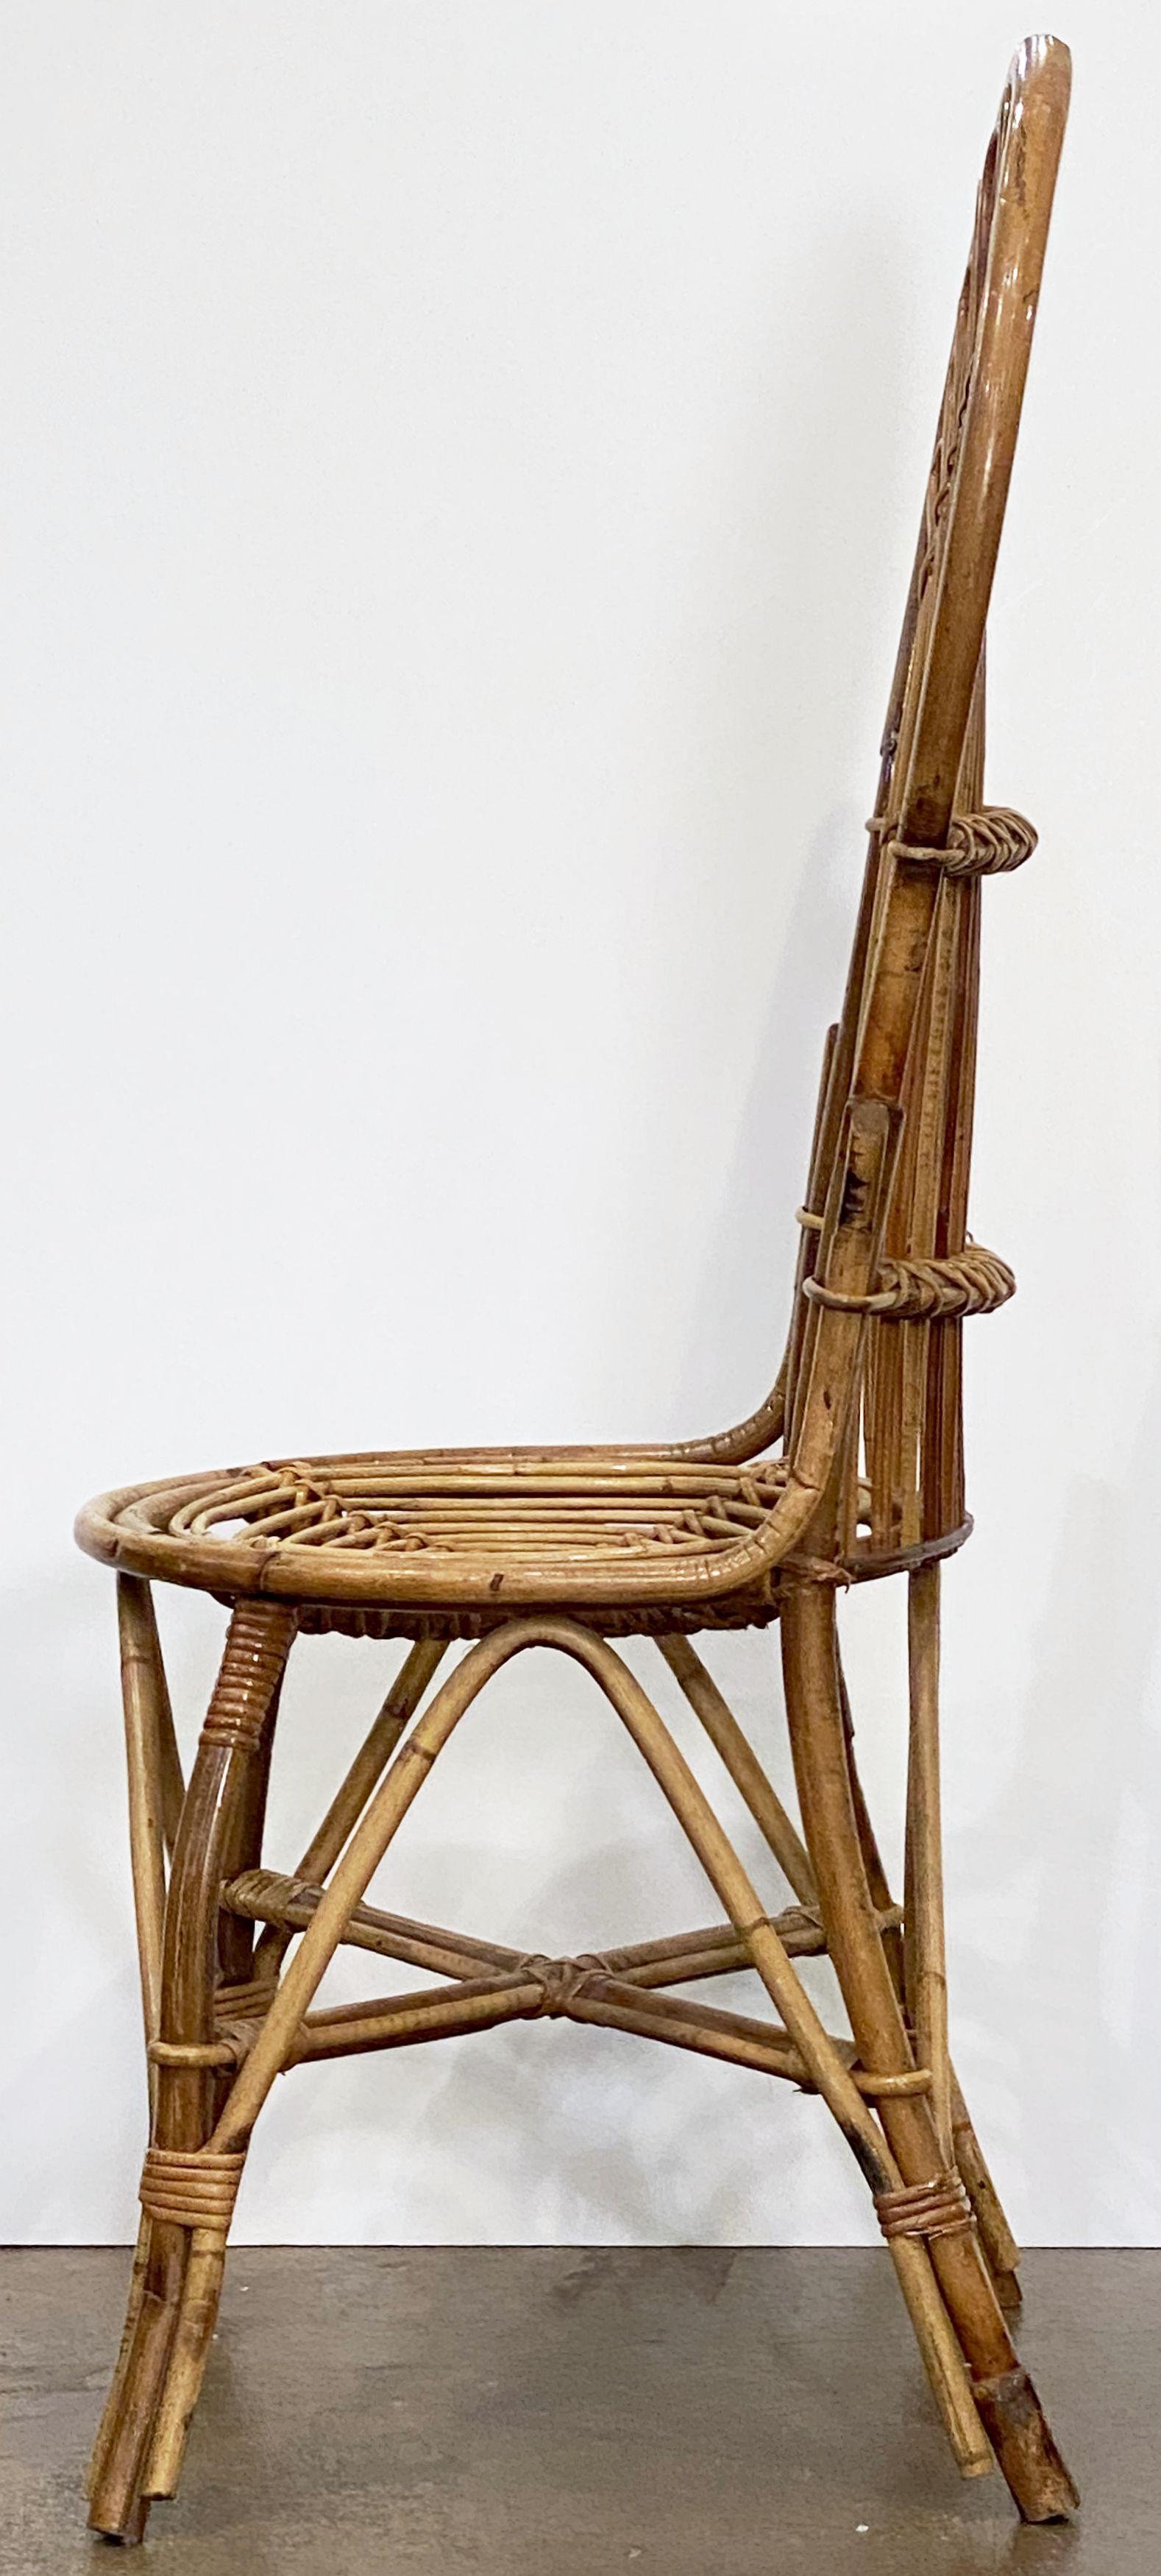 Italian Fan-Backed Chair of Rattan and Bamboo from the Mid-20th Century For Sale 11